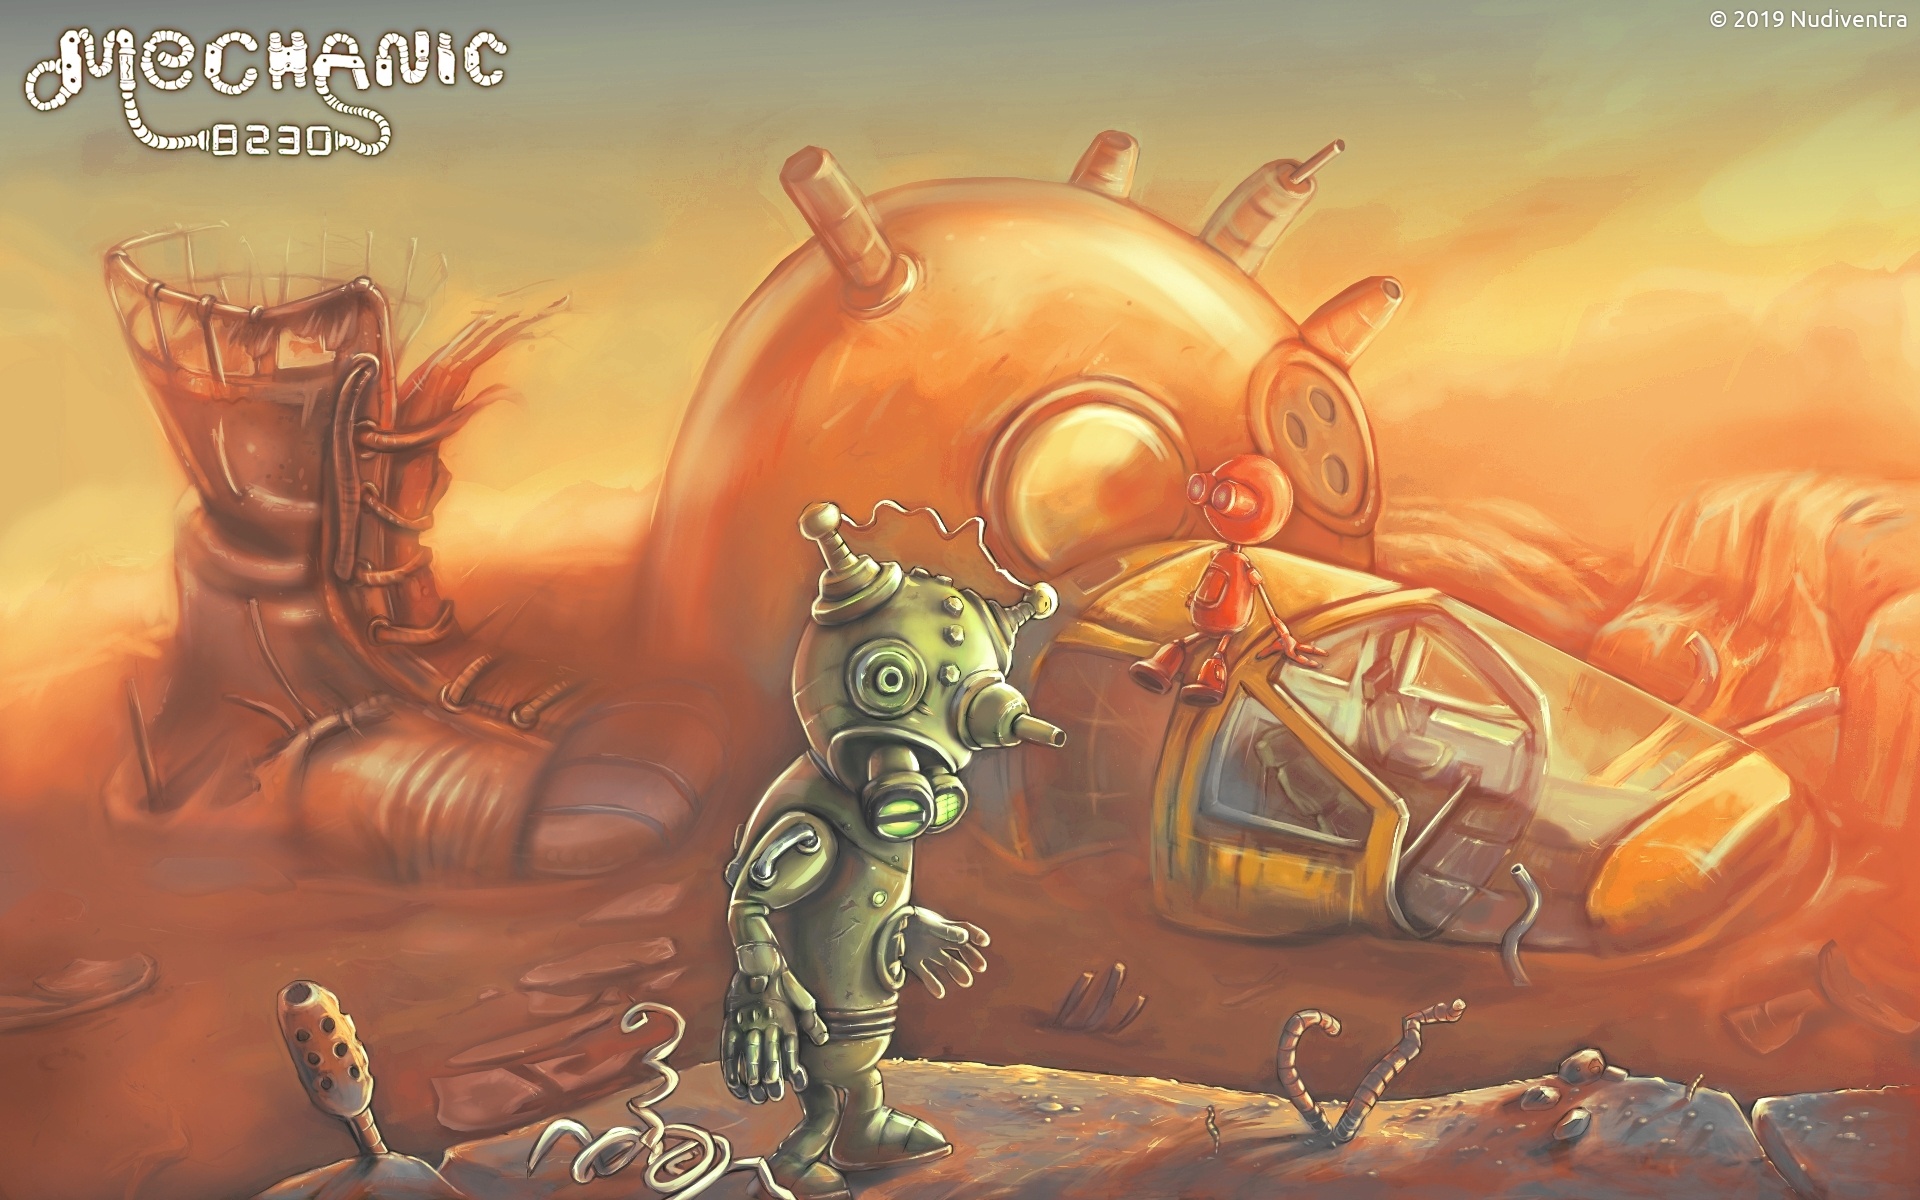 Mechanic 8230 (Game): Escape from Ilgrot, Game with cyberpunk elements. 1920x1200 HD Background.